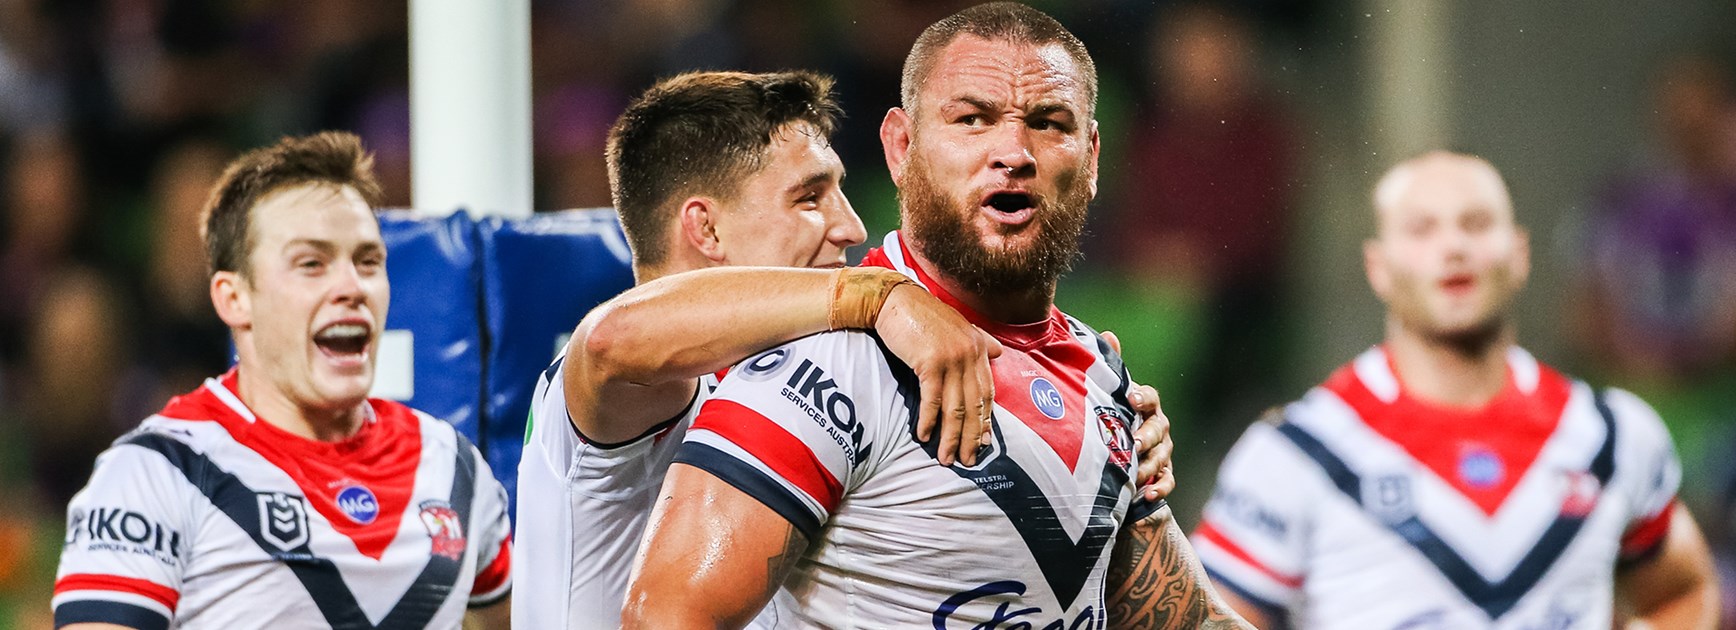 Sydney Roosters Outstanding Win Of 2019